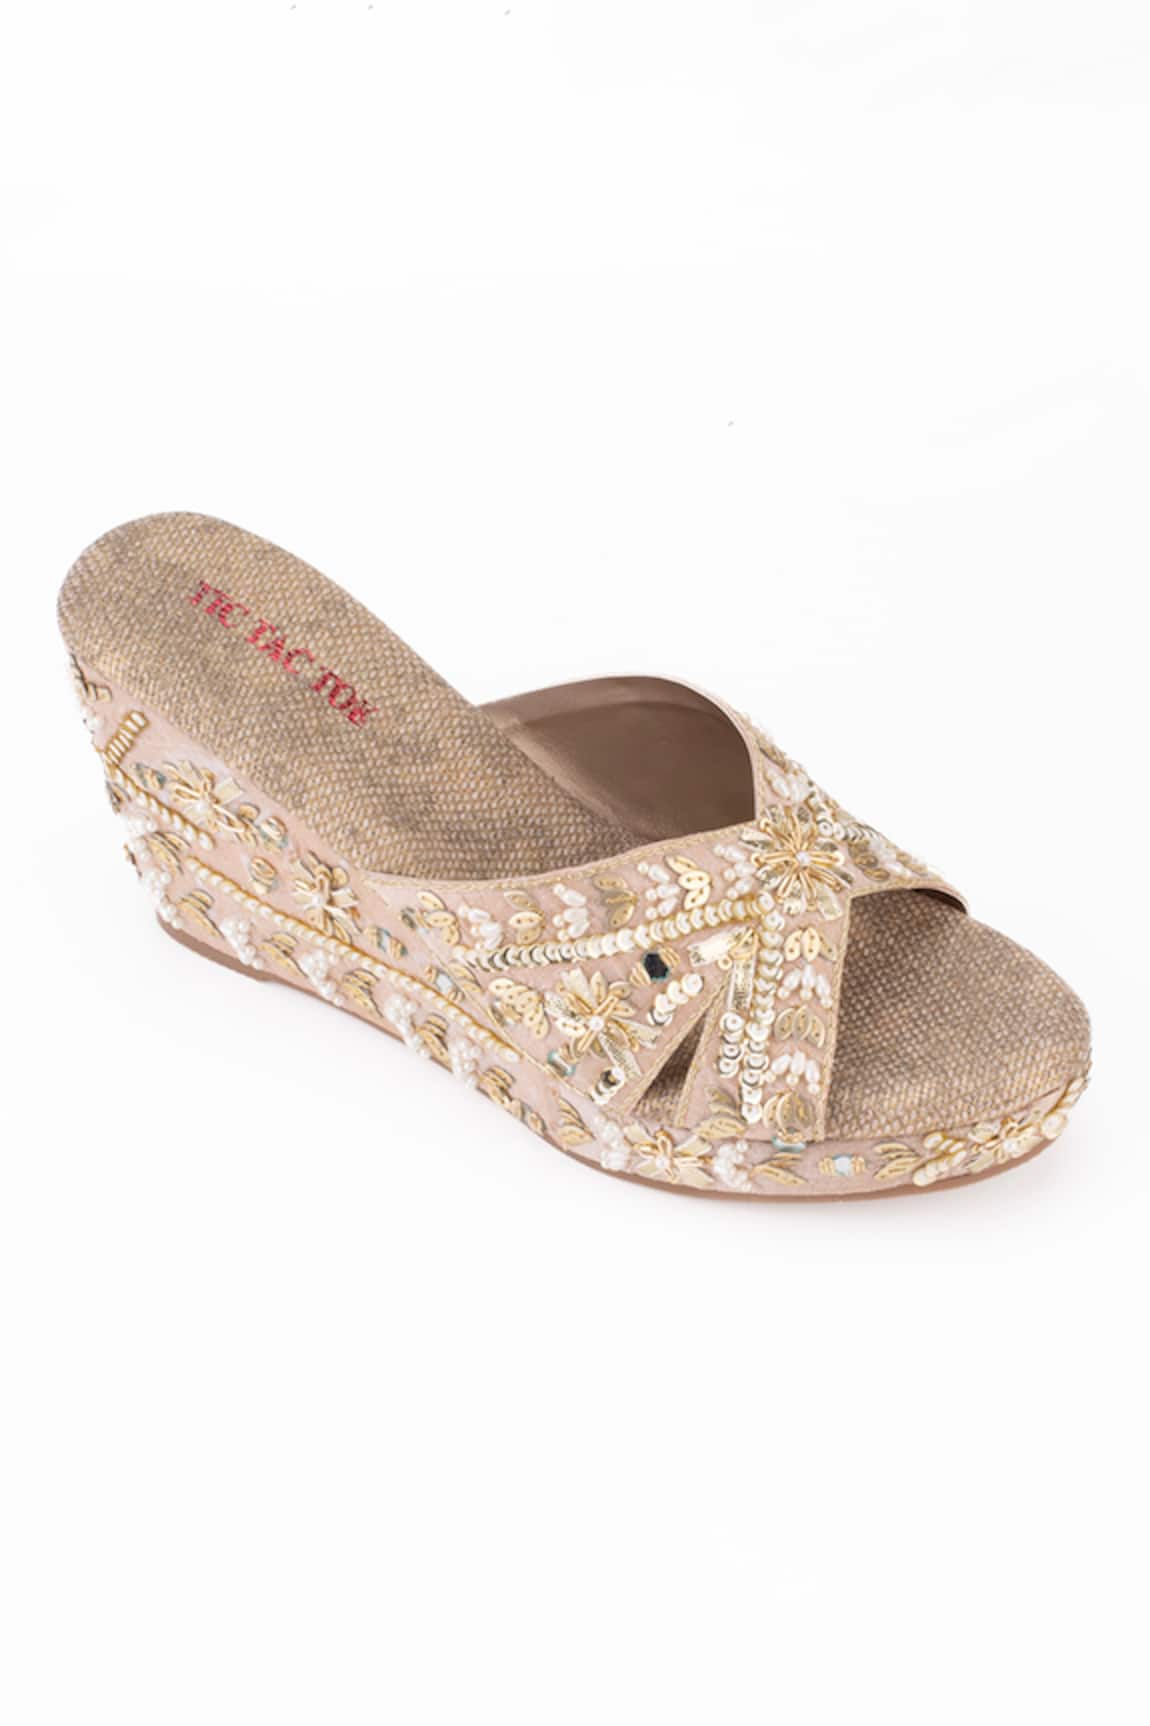 Tic Tac Toe Footwear Pearl Embroidered Strap Wedges